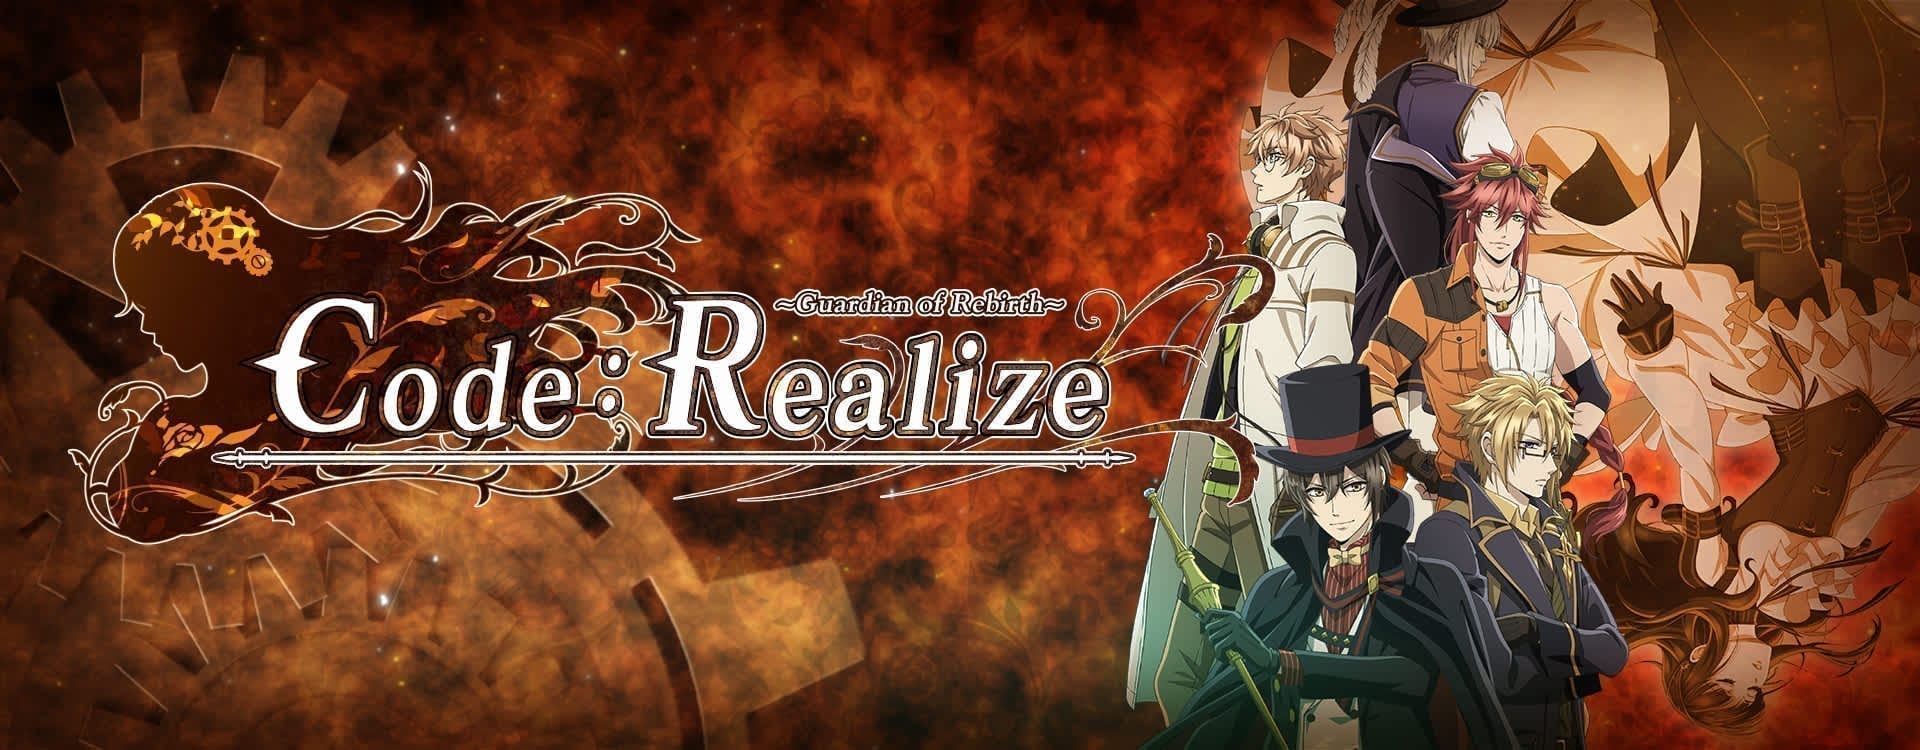 [Recenzja] Code:Realize – Guardian of Rebirth – tainted love